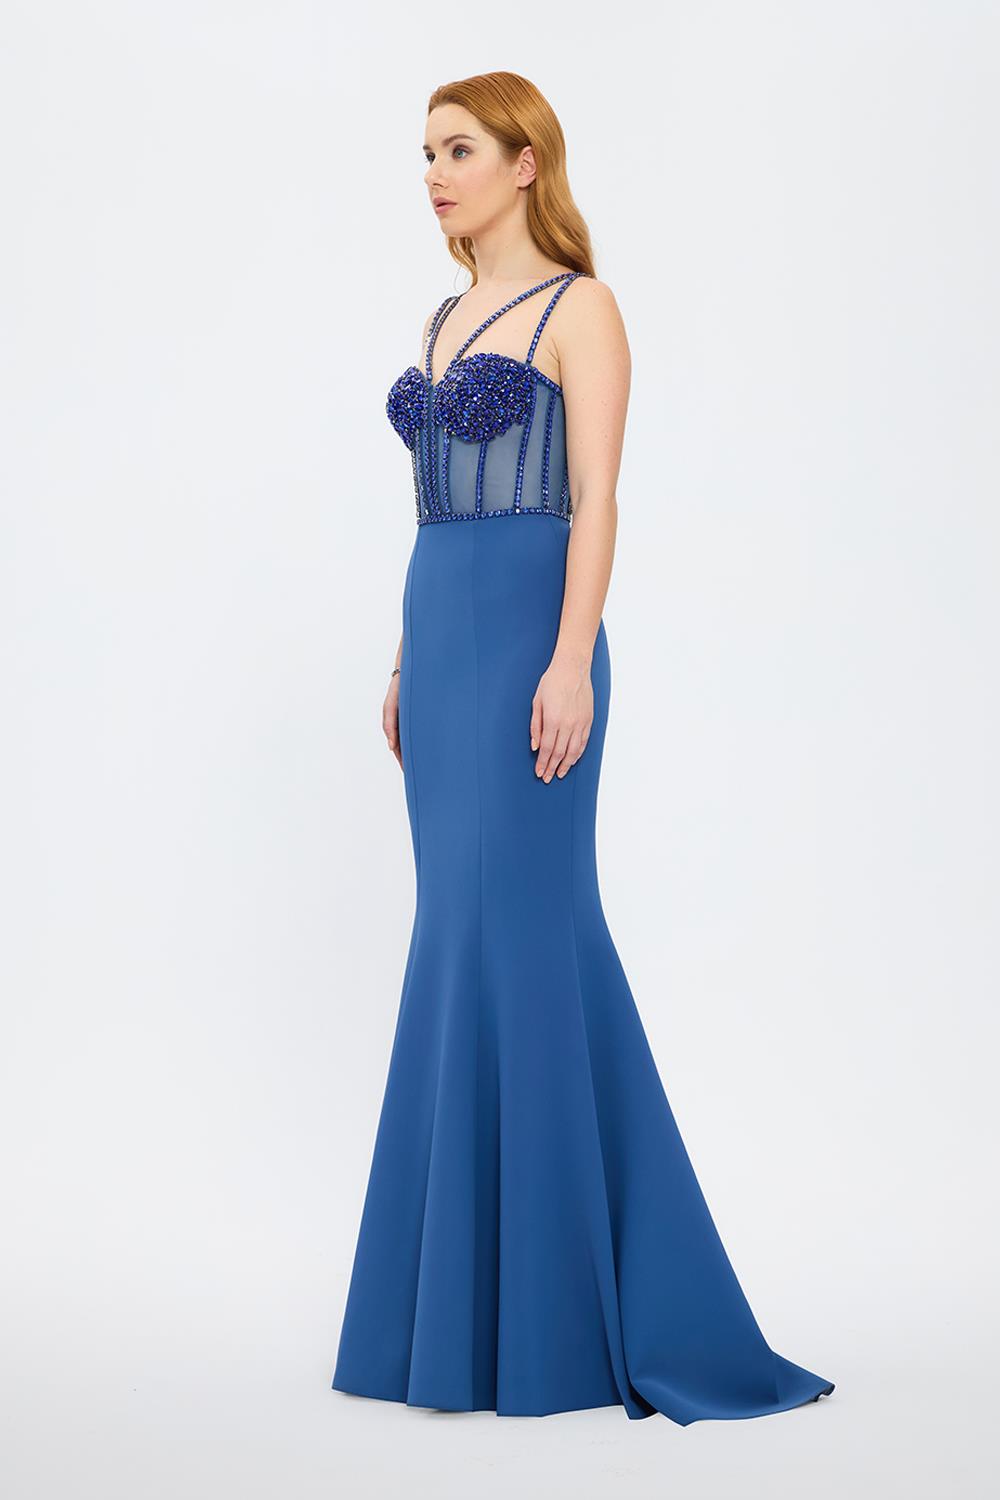 Strapless Bustier Detailed Crepe Evening Dress